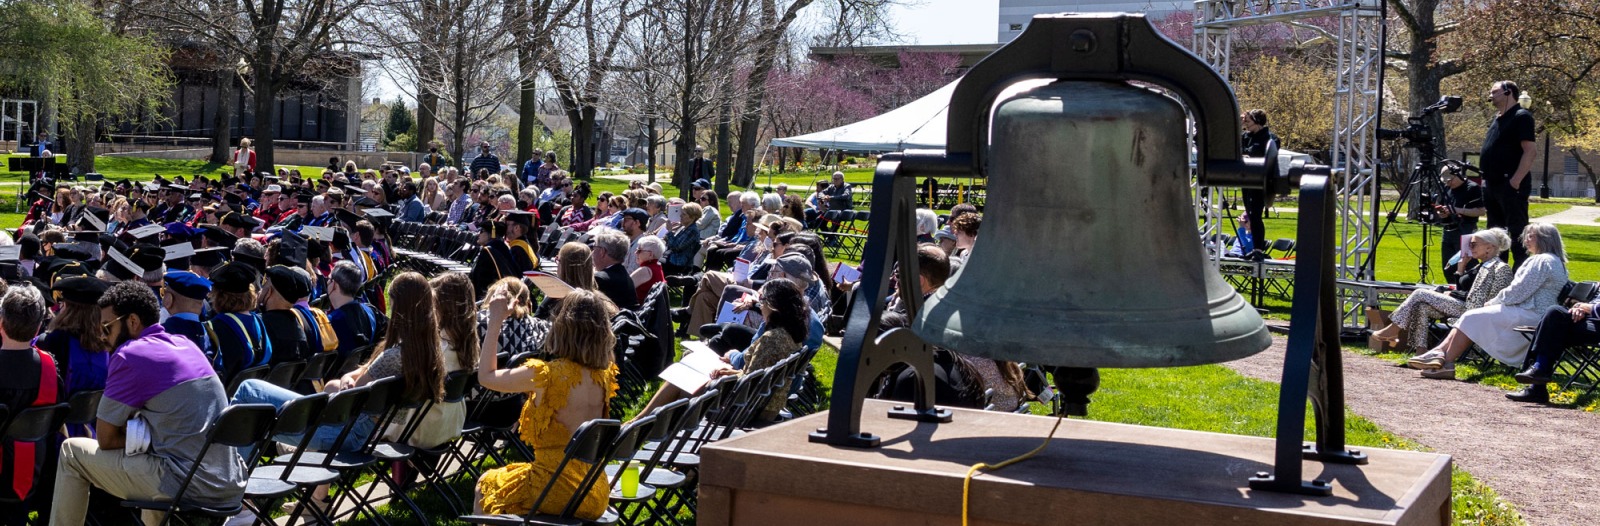 Iowa College Bell in the foreground, with an audience at the commencement stage behind it